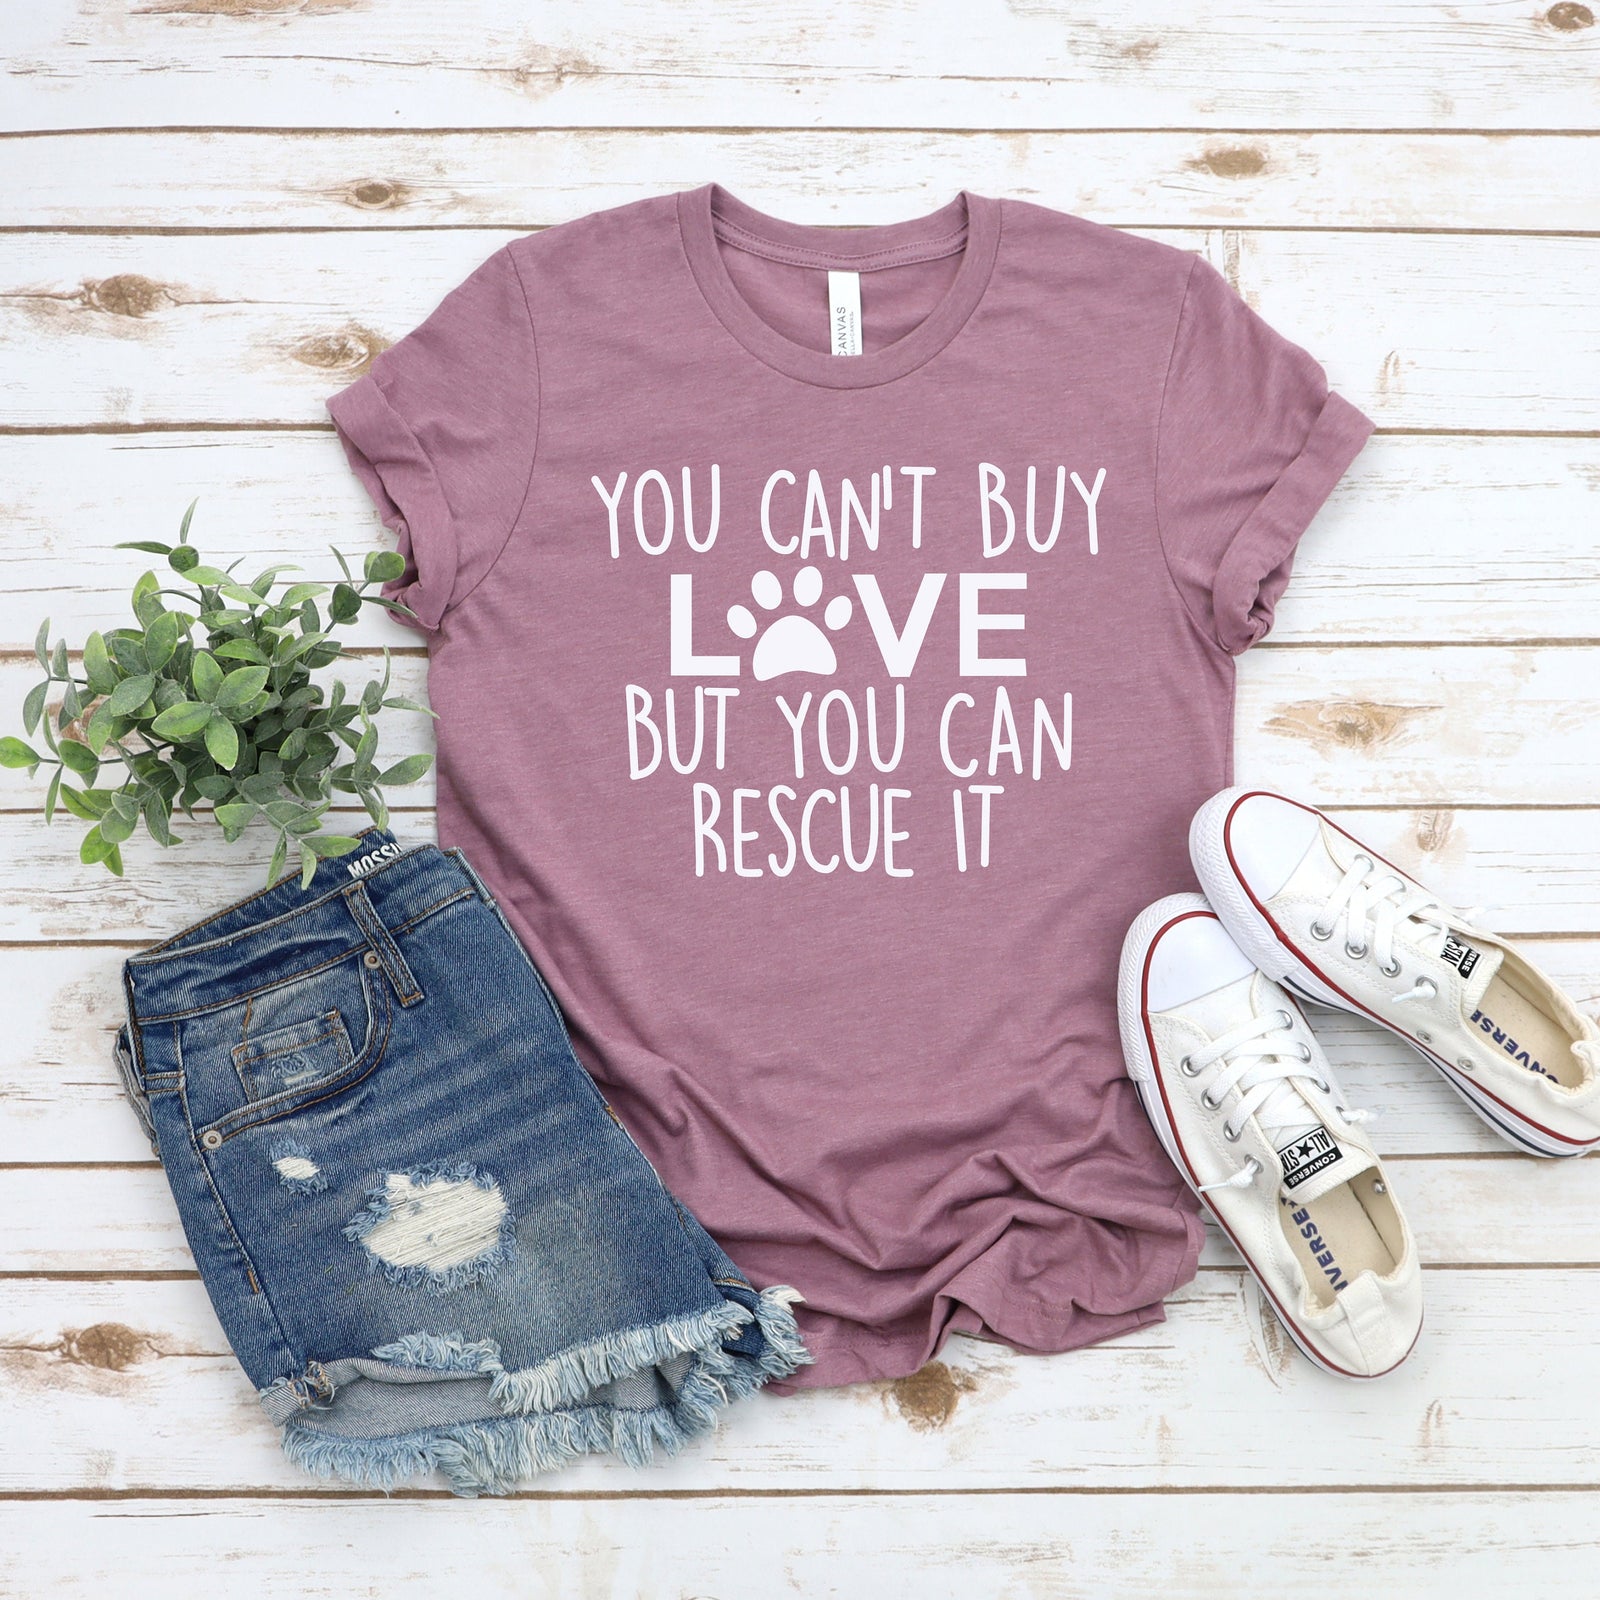 You Can't Buy Love But You Can Rescue It - Pet Lover T Shirt - Dog Mom - Cute Paw Shirt